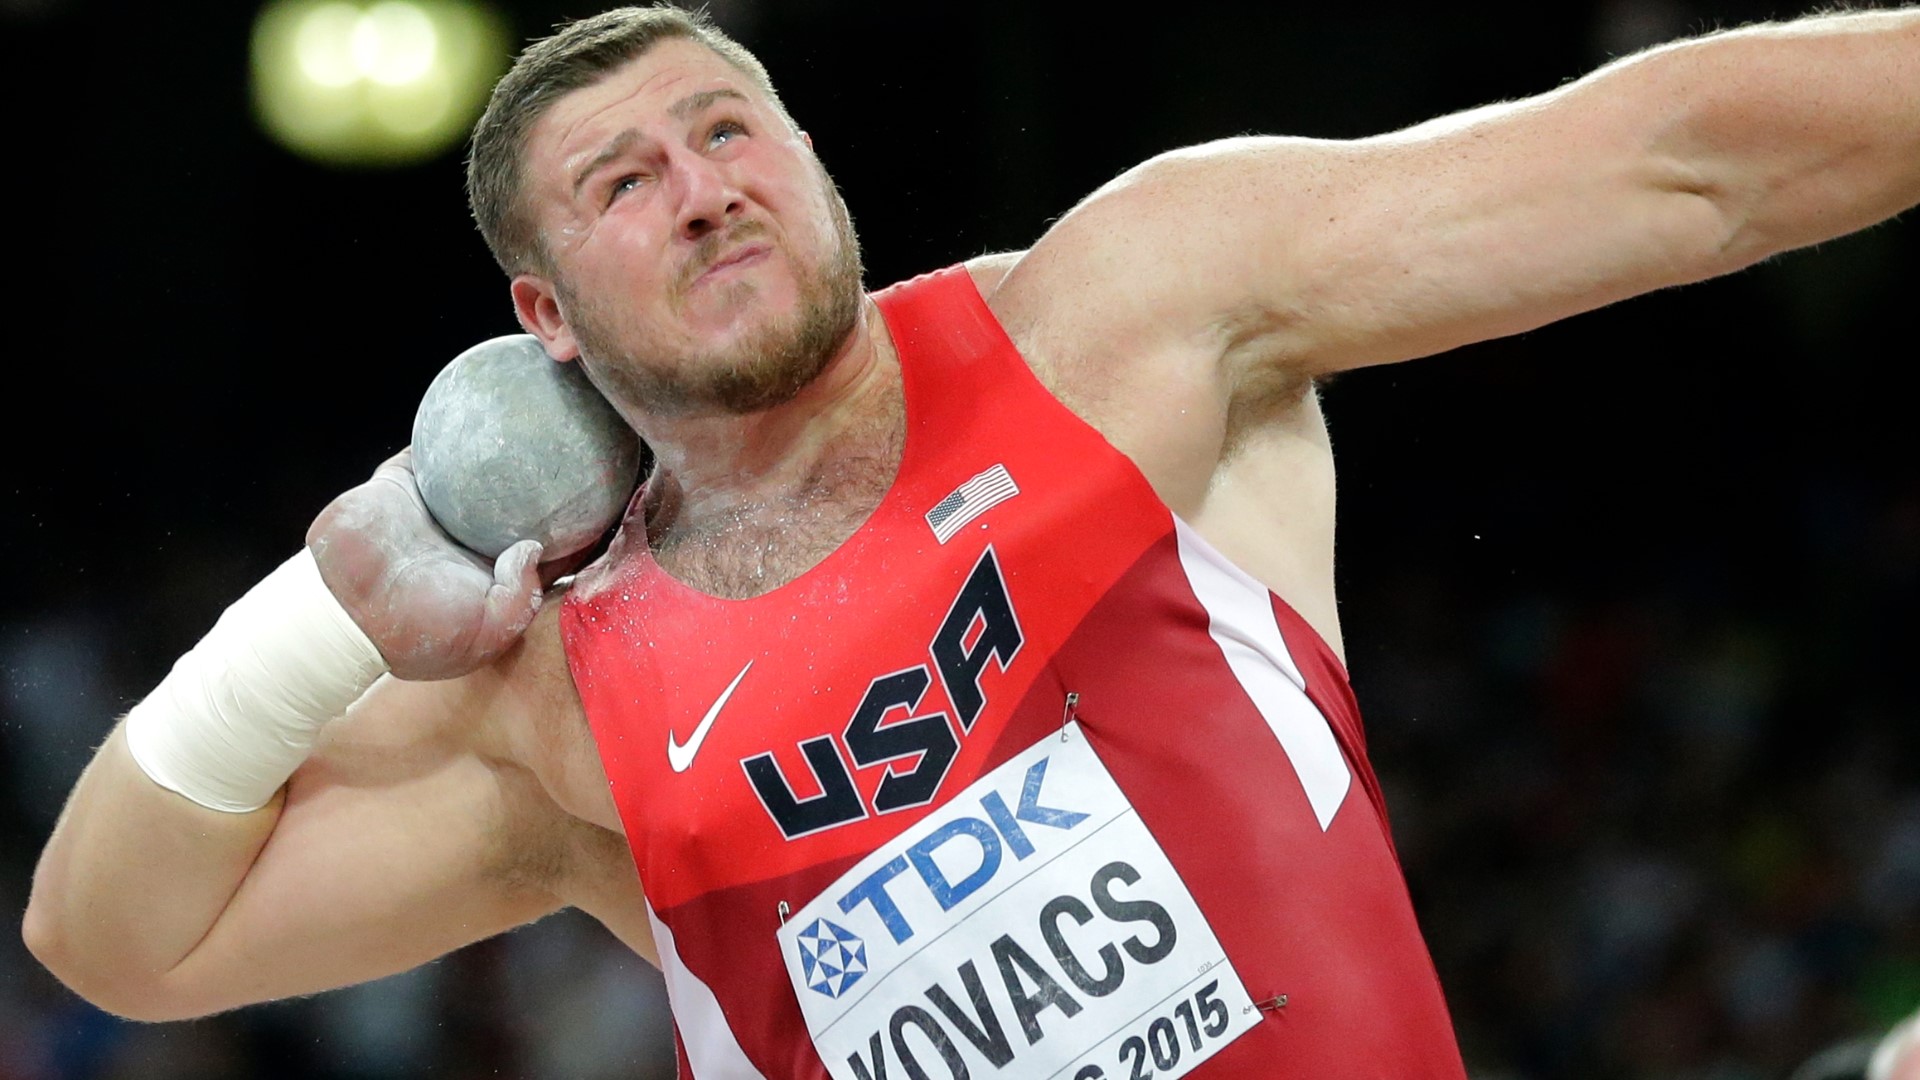 Kovacs throws the shot put and is coached by his wife Emma Coburn, who is also a track and field athlete